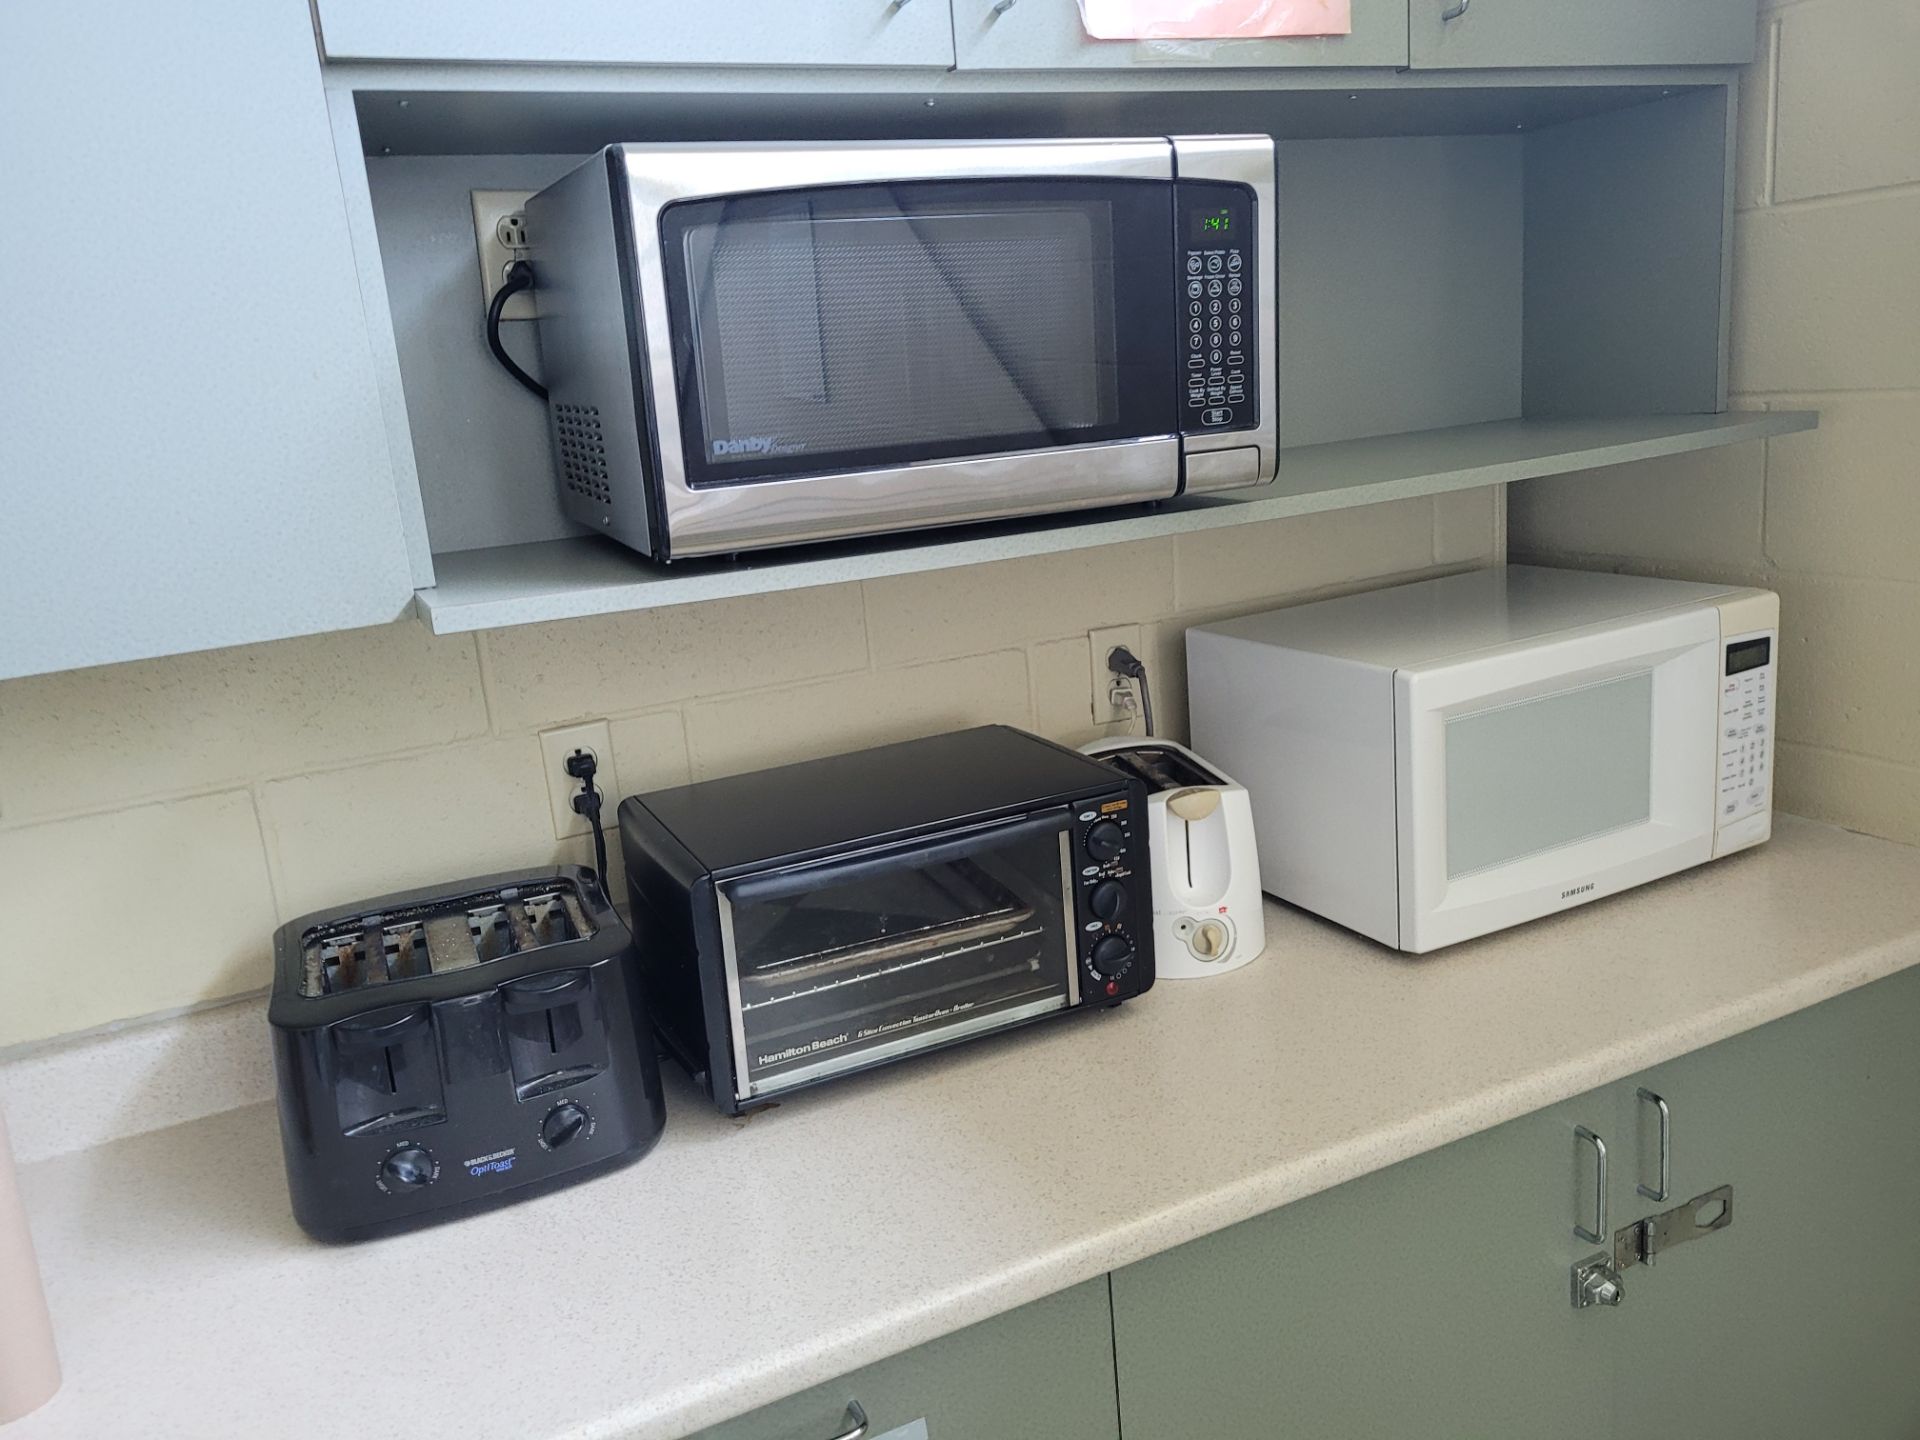 Lot of kitchen appliances Fridge, (7) microwaves, (2) toasters, toaster oven, water cooler - Image 3 of 4